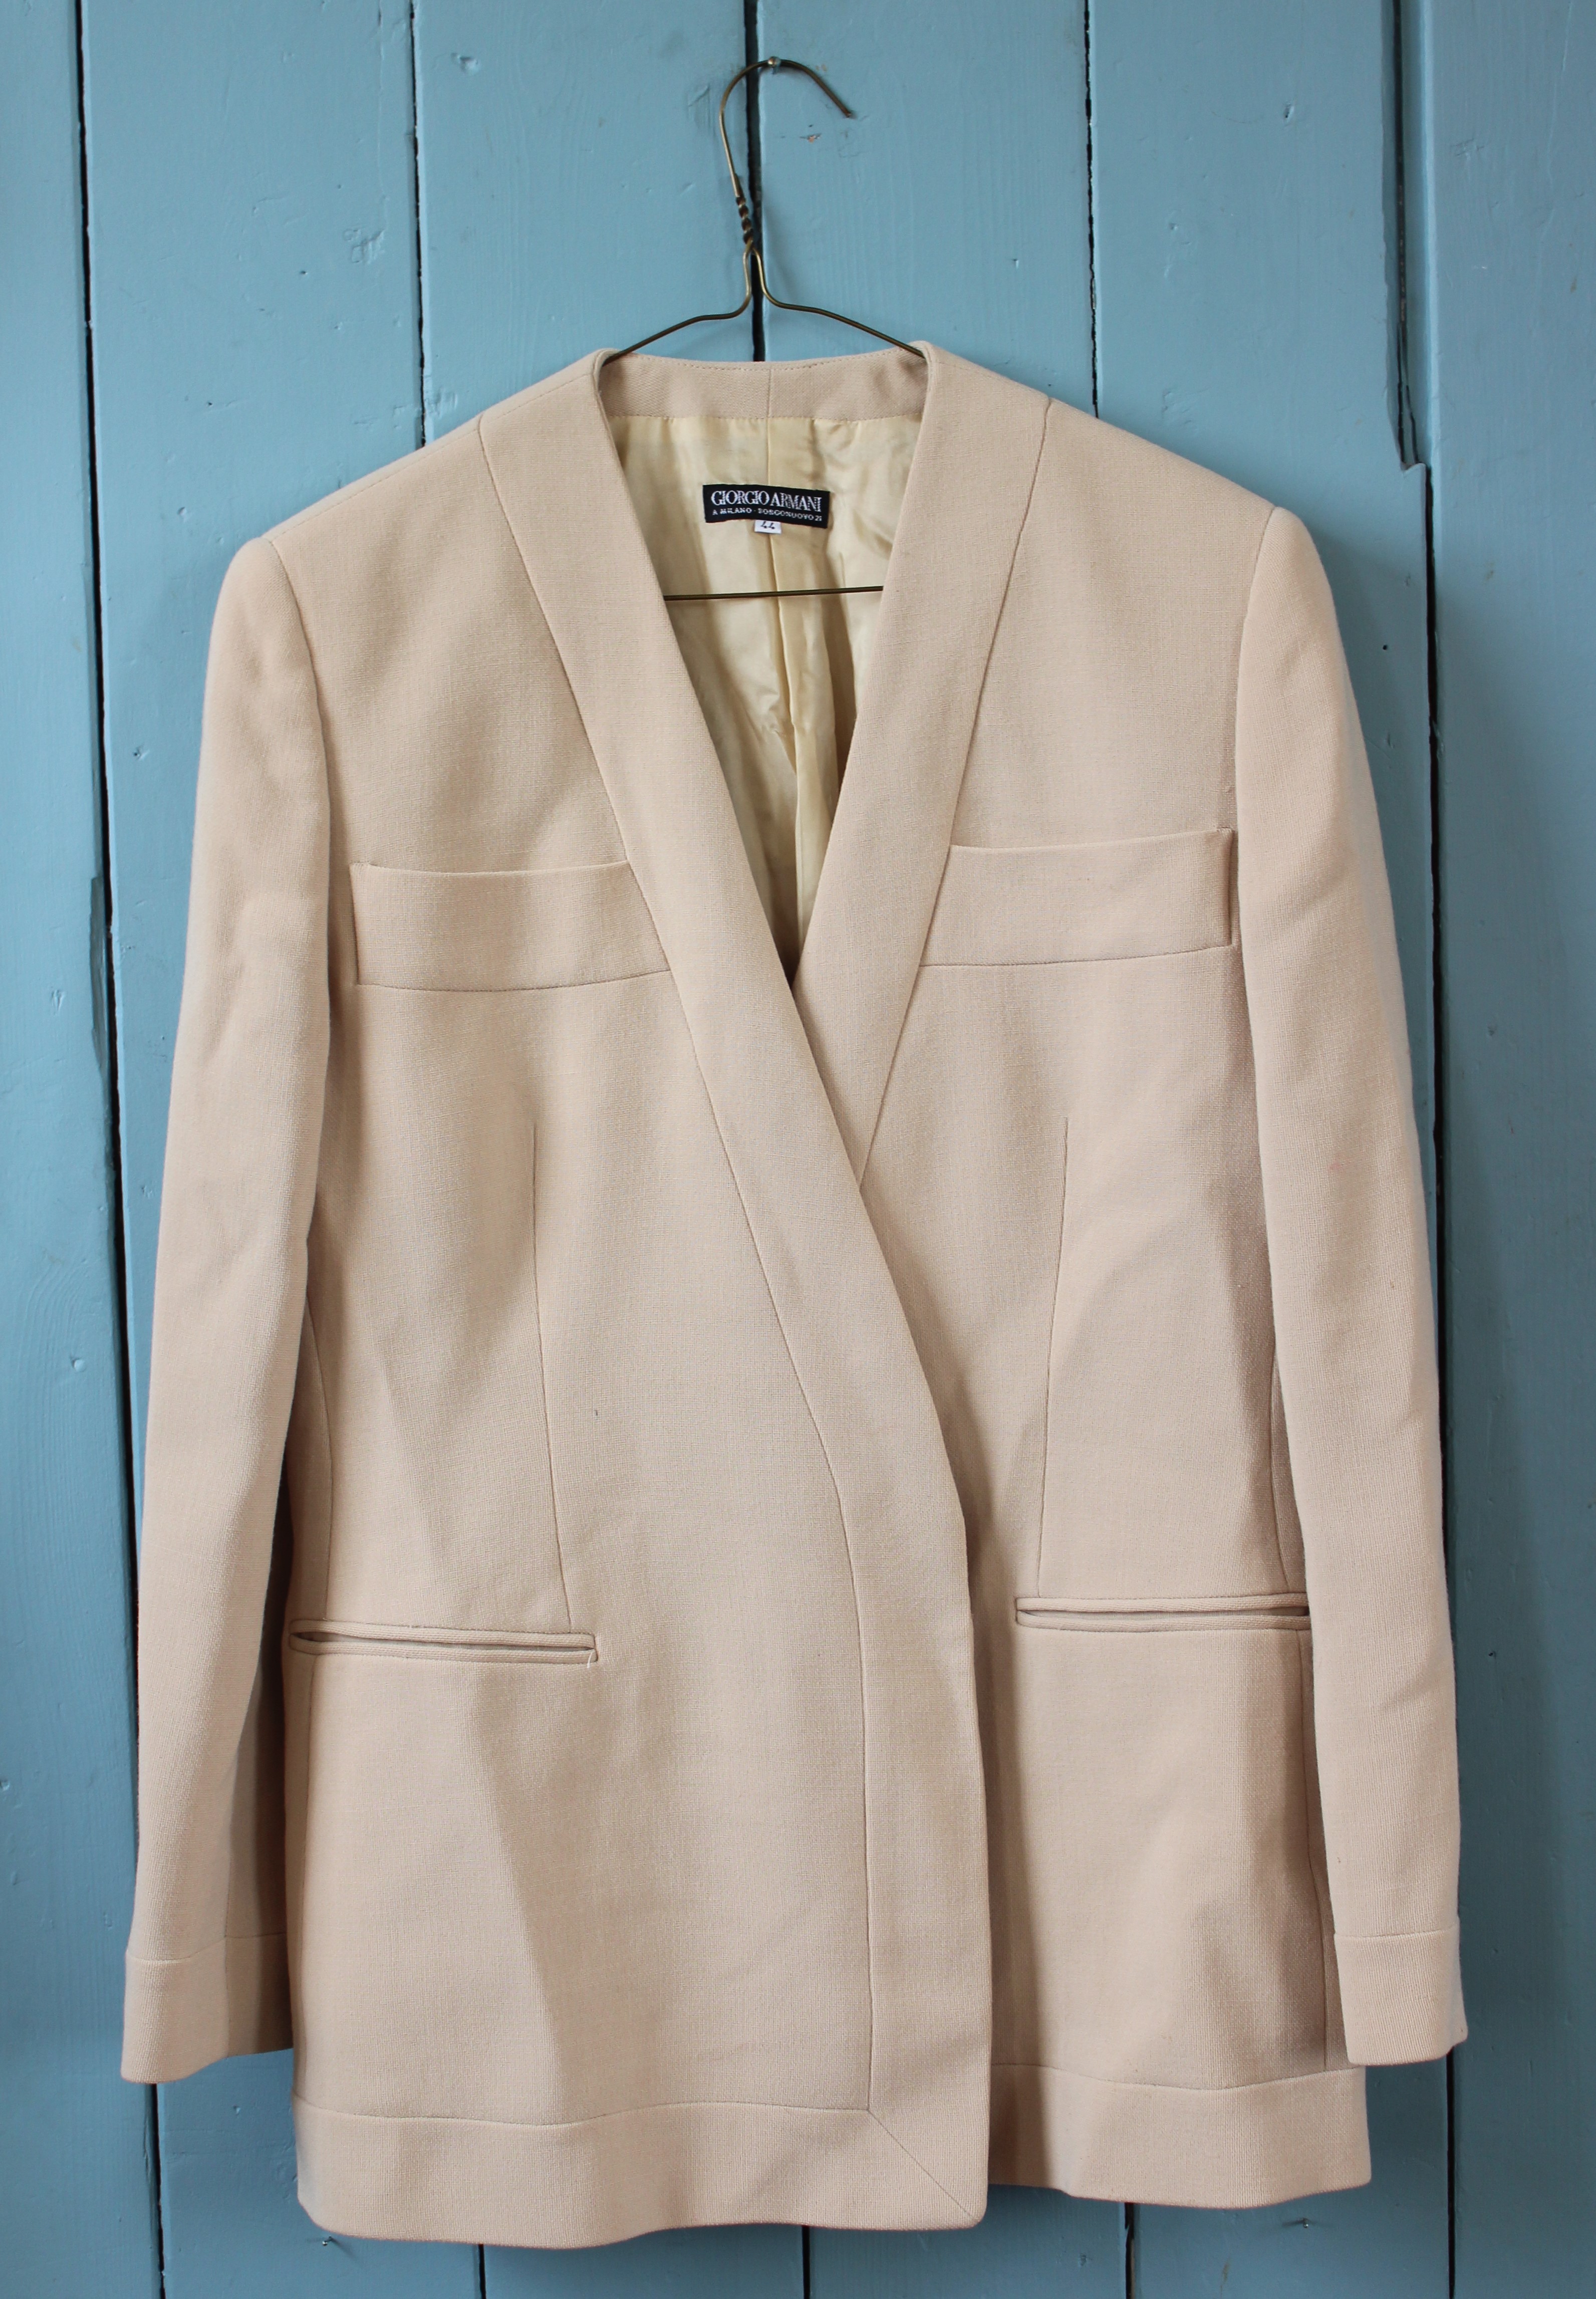 A collection of ladies fashion garments to include a two Giorgio Armani jackets in peach and ivory,